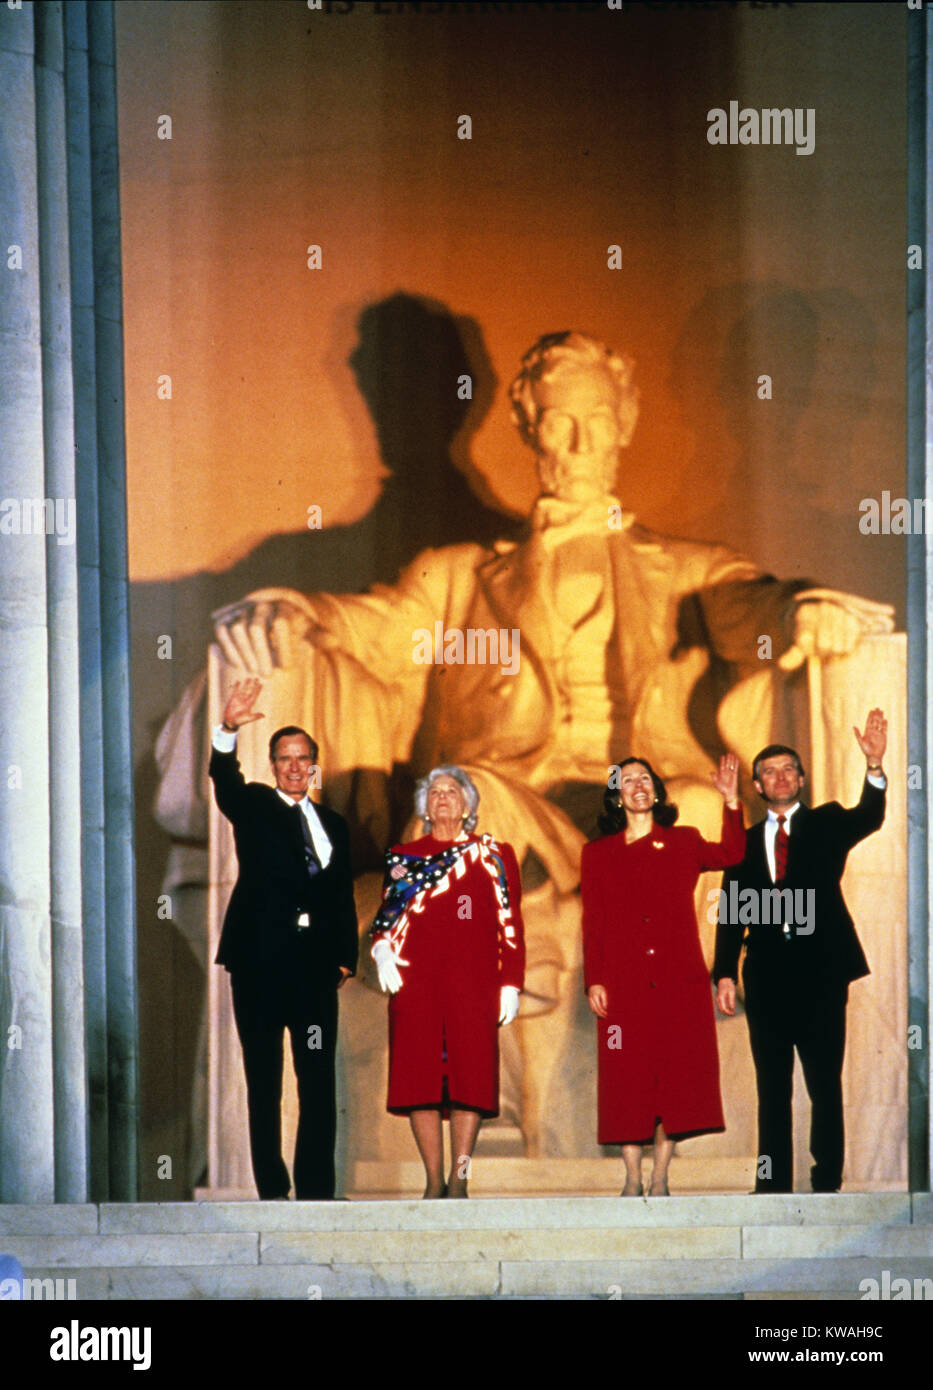 Washington, District of Columbia, USA. 18th Jan, 1989. United States President-elect George H.W. Bush attends the opening ceremony for his inauguration at the Lincoln Memorial in Washington, DC on January 18 1989. From left to right: President-elect Bush, Barbara Bush, Marilyn Quayle, and US Vice President-elect Dan Quayle.Credit: Robert Trippett/Pool via CNP Credit: Robert Trippett/CNP/ZUMA Wire/Alamy Live News Stock Photo